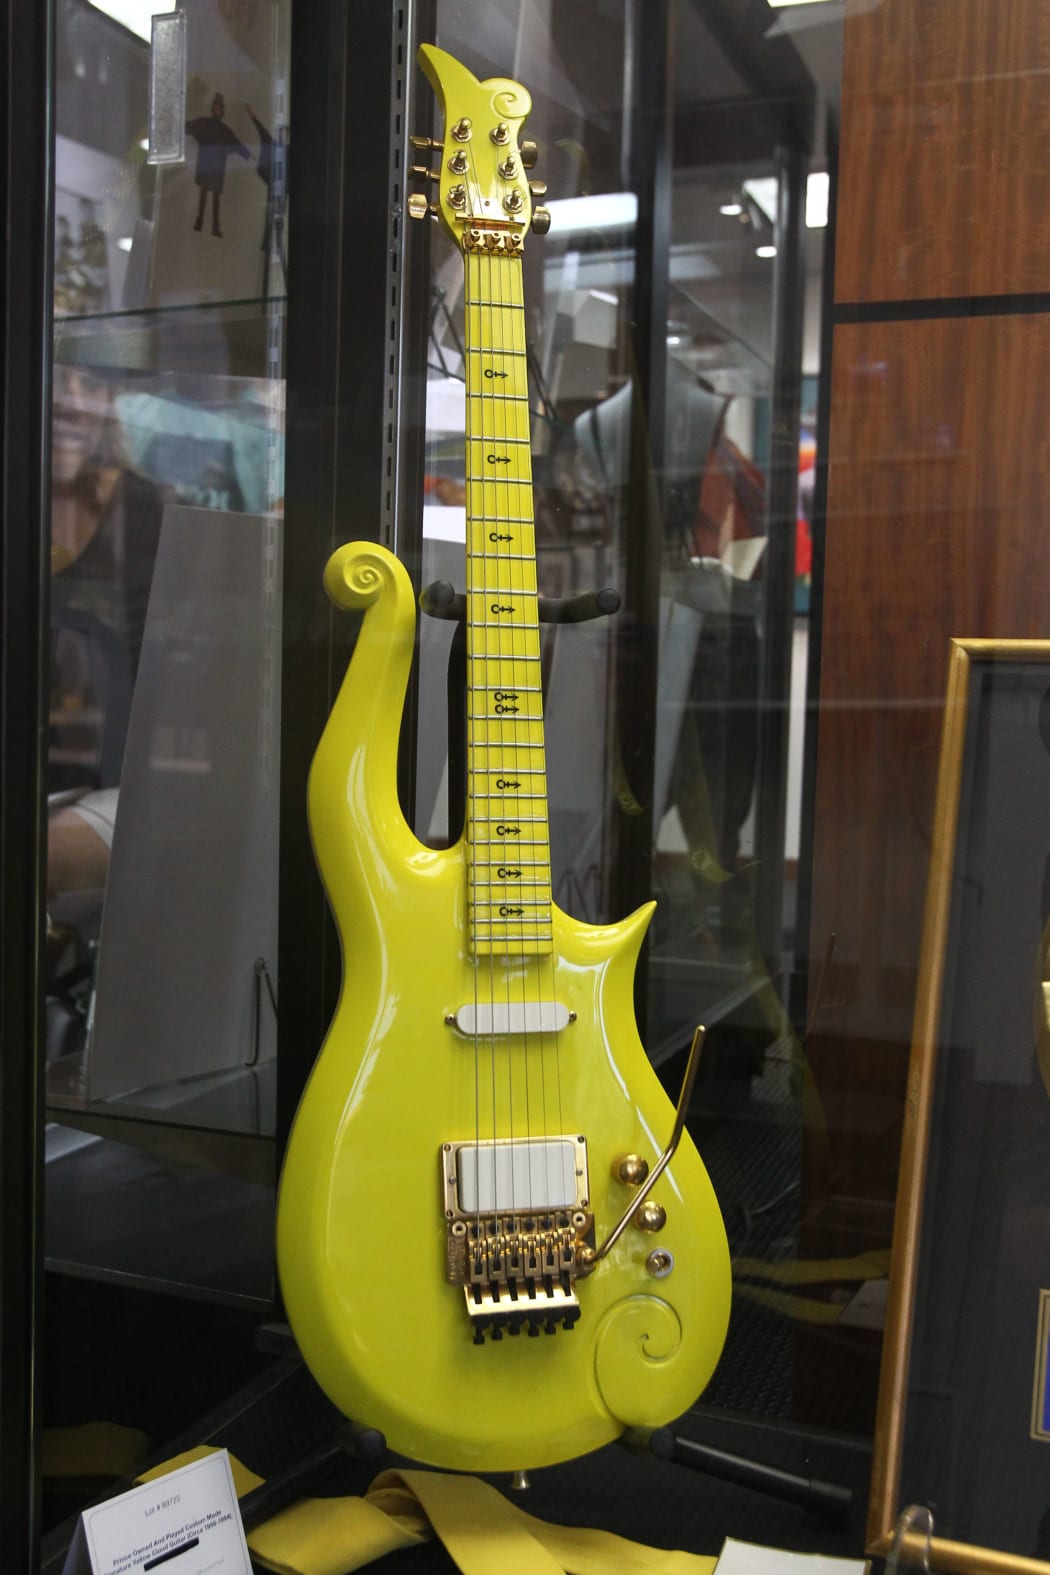 A Prince owned and played custom made signature yellow cloud guitar (Circa 1988-1994) is displayed during a media preview June 22, 2016 at Heritage Auctions in Beverly Hills, California. The guitar is one of the items offered in a live auction June 24-25.